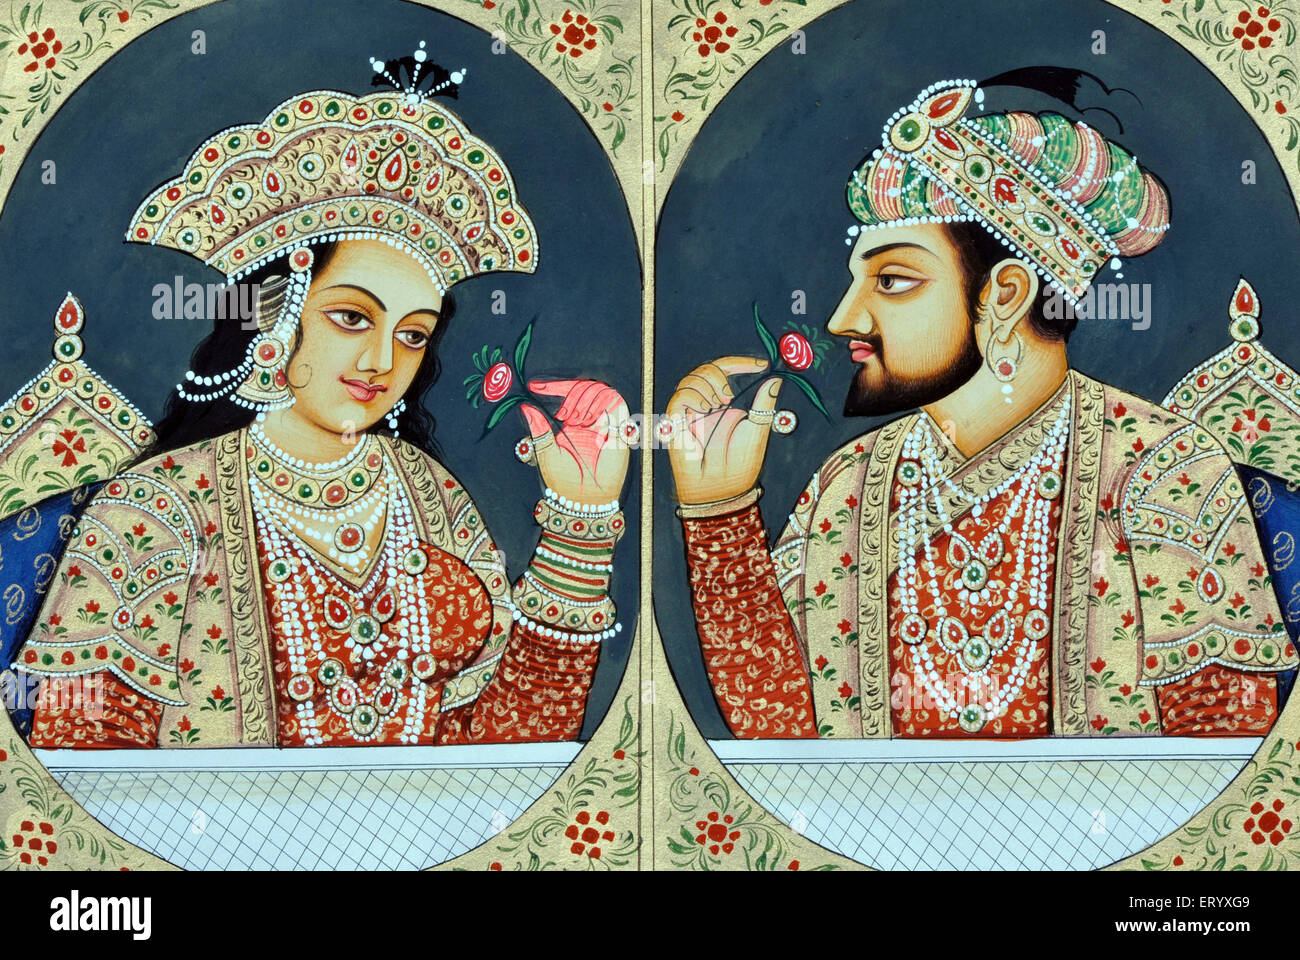 Shah Jahan and Mumtaz Mahal smelling pink rose flower, Mughal emperor and empress, Miniature Painting, India, Asia, painting Stock Photo